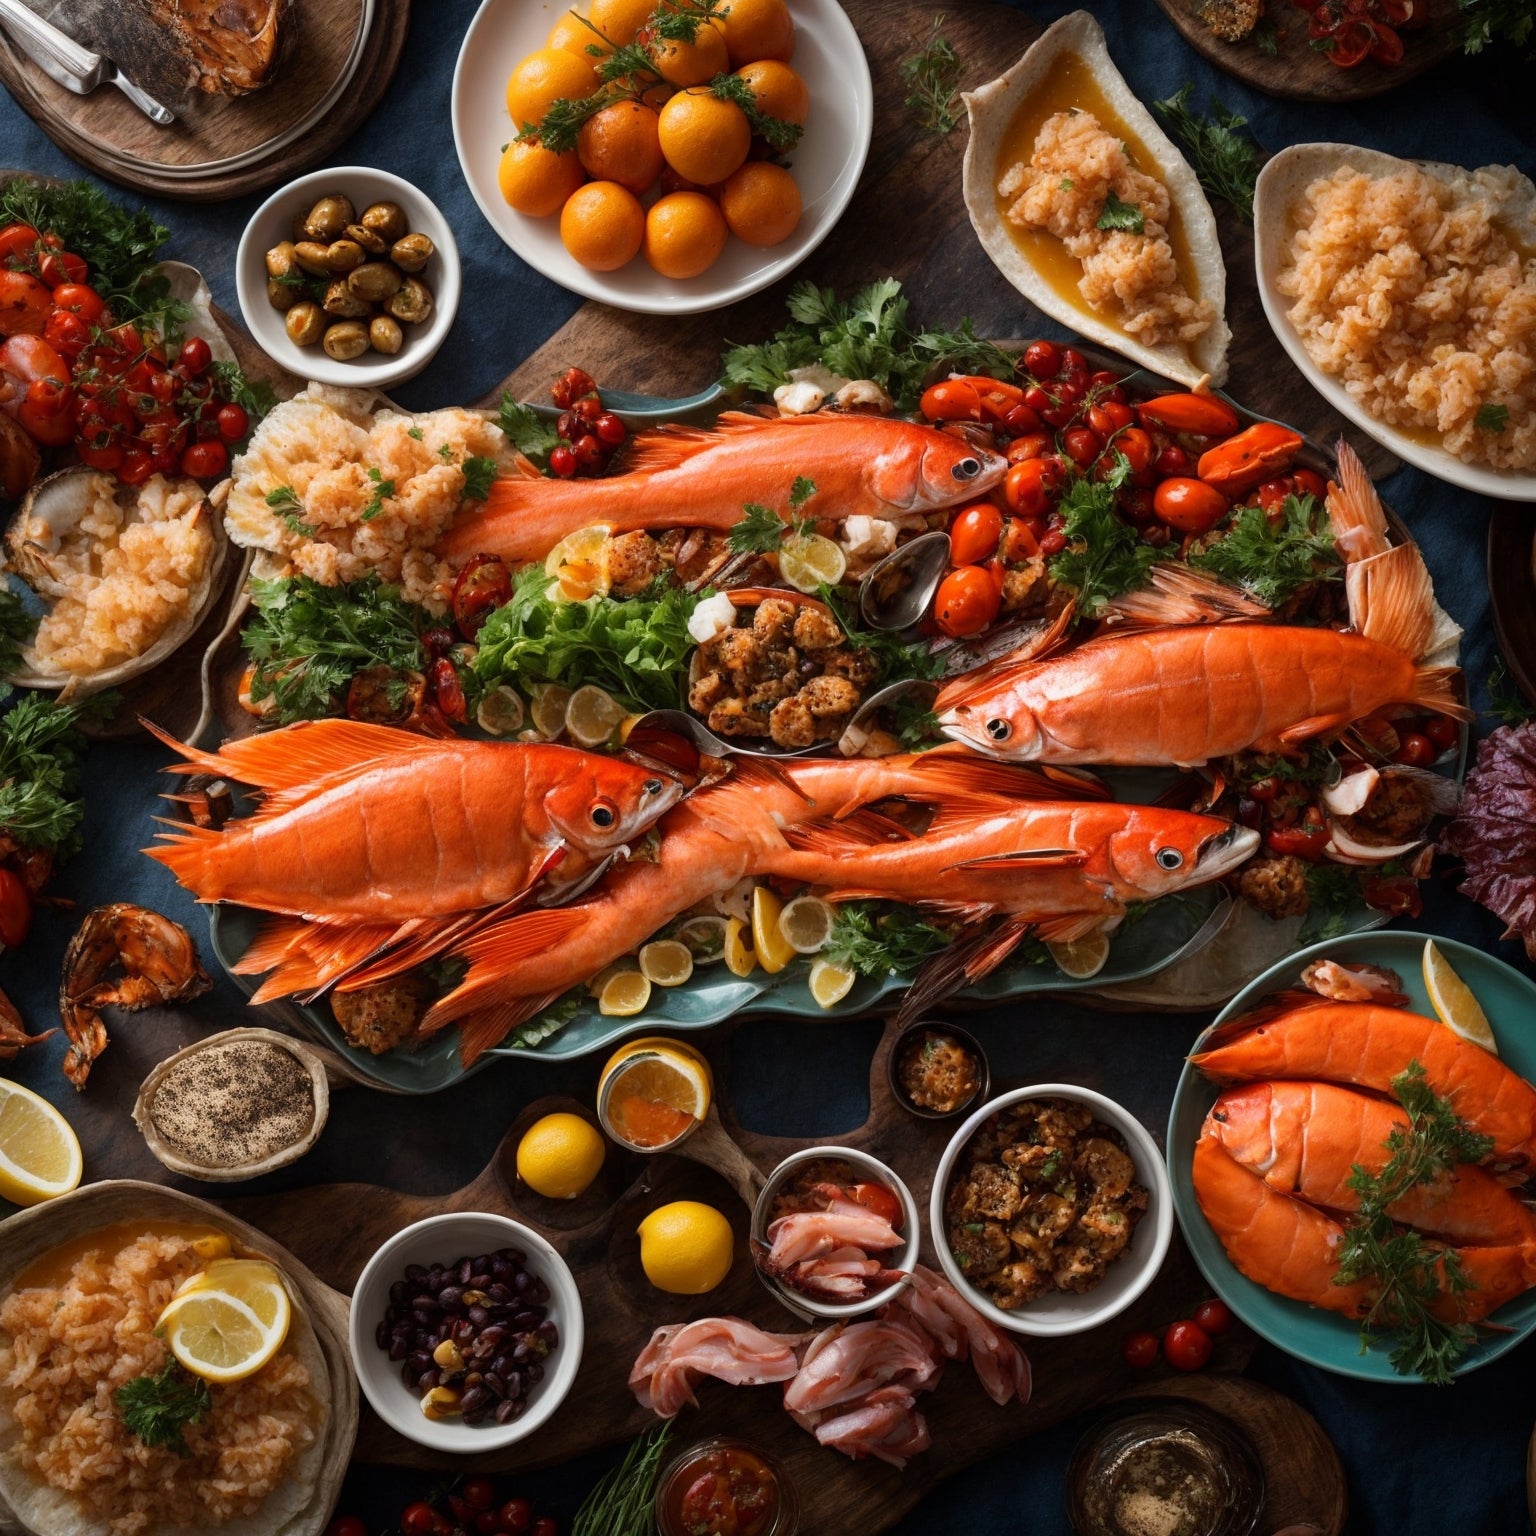 Culinary Extravaganza: Global Seafoods' Gourmet Seafood Platter